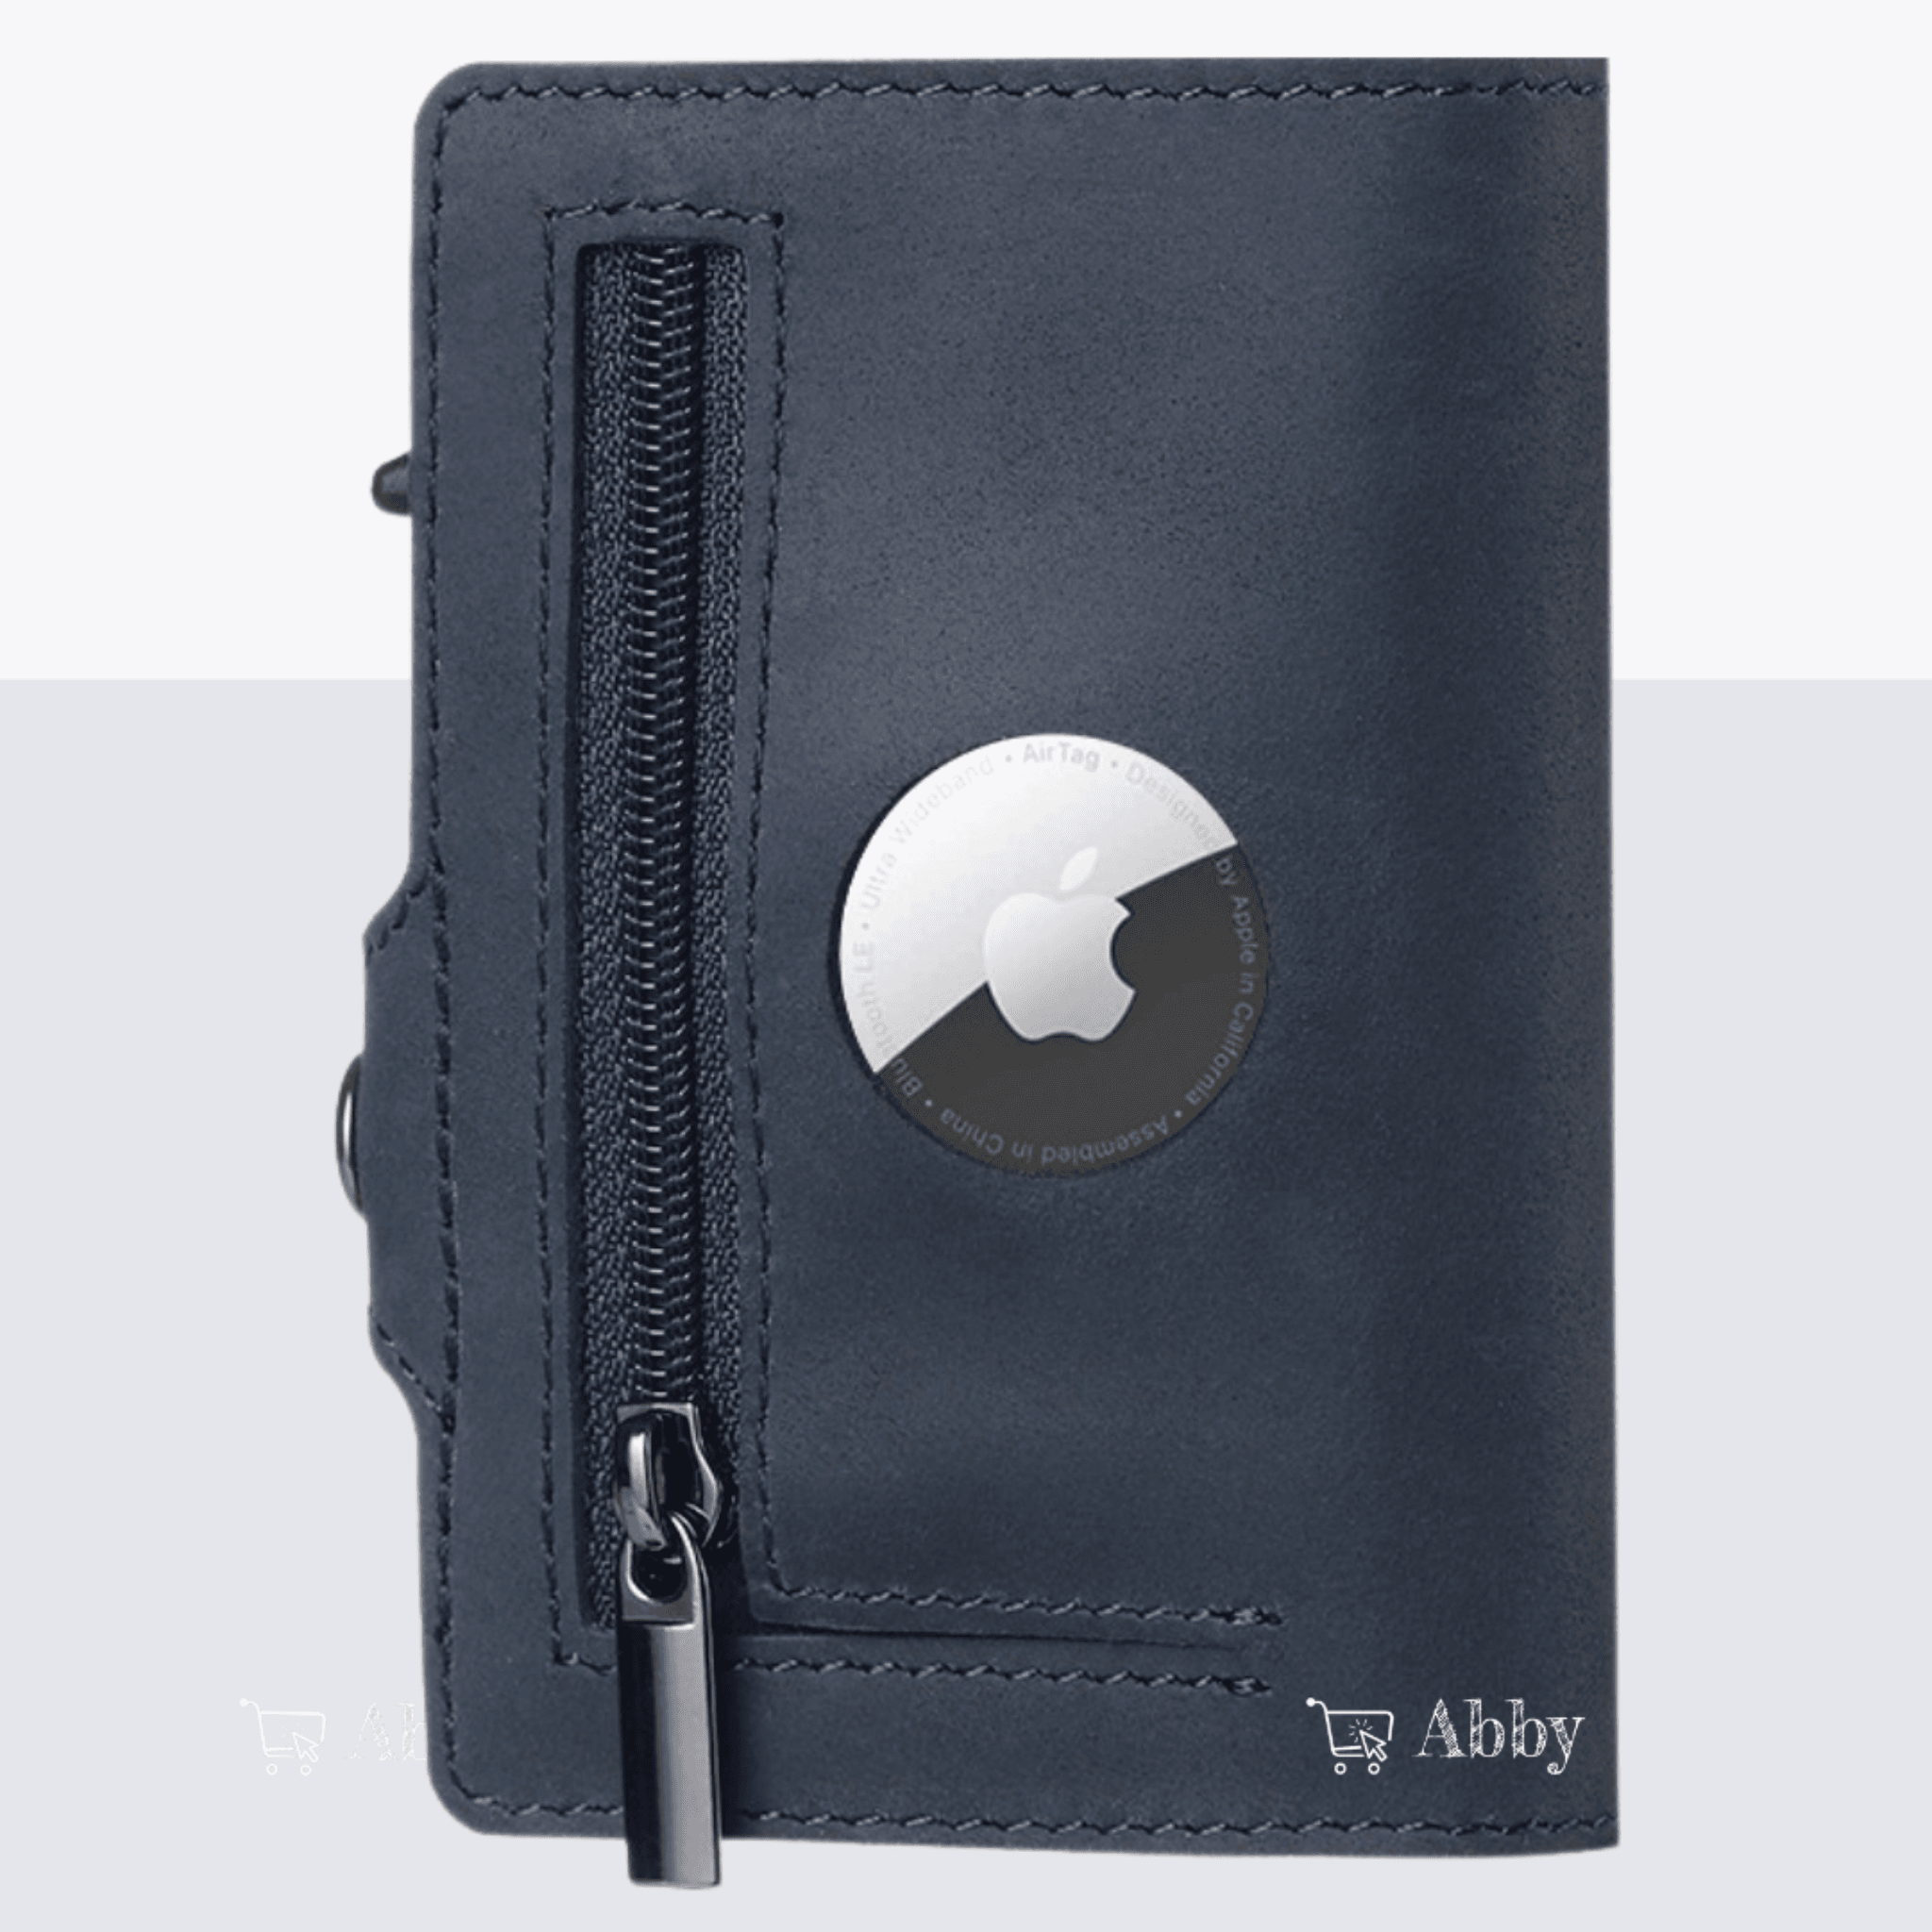 Abby's™ AirTag Trackable Leather Wallet with Apple AirTag Holder Case - RFID Blocking and Protection - Abbycart